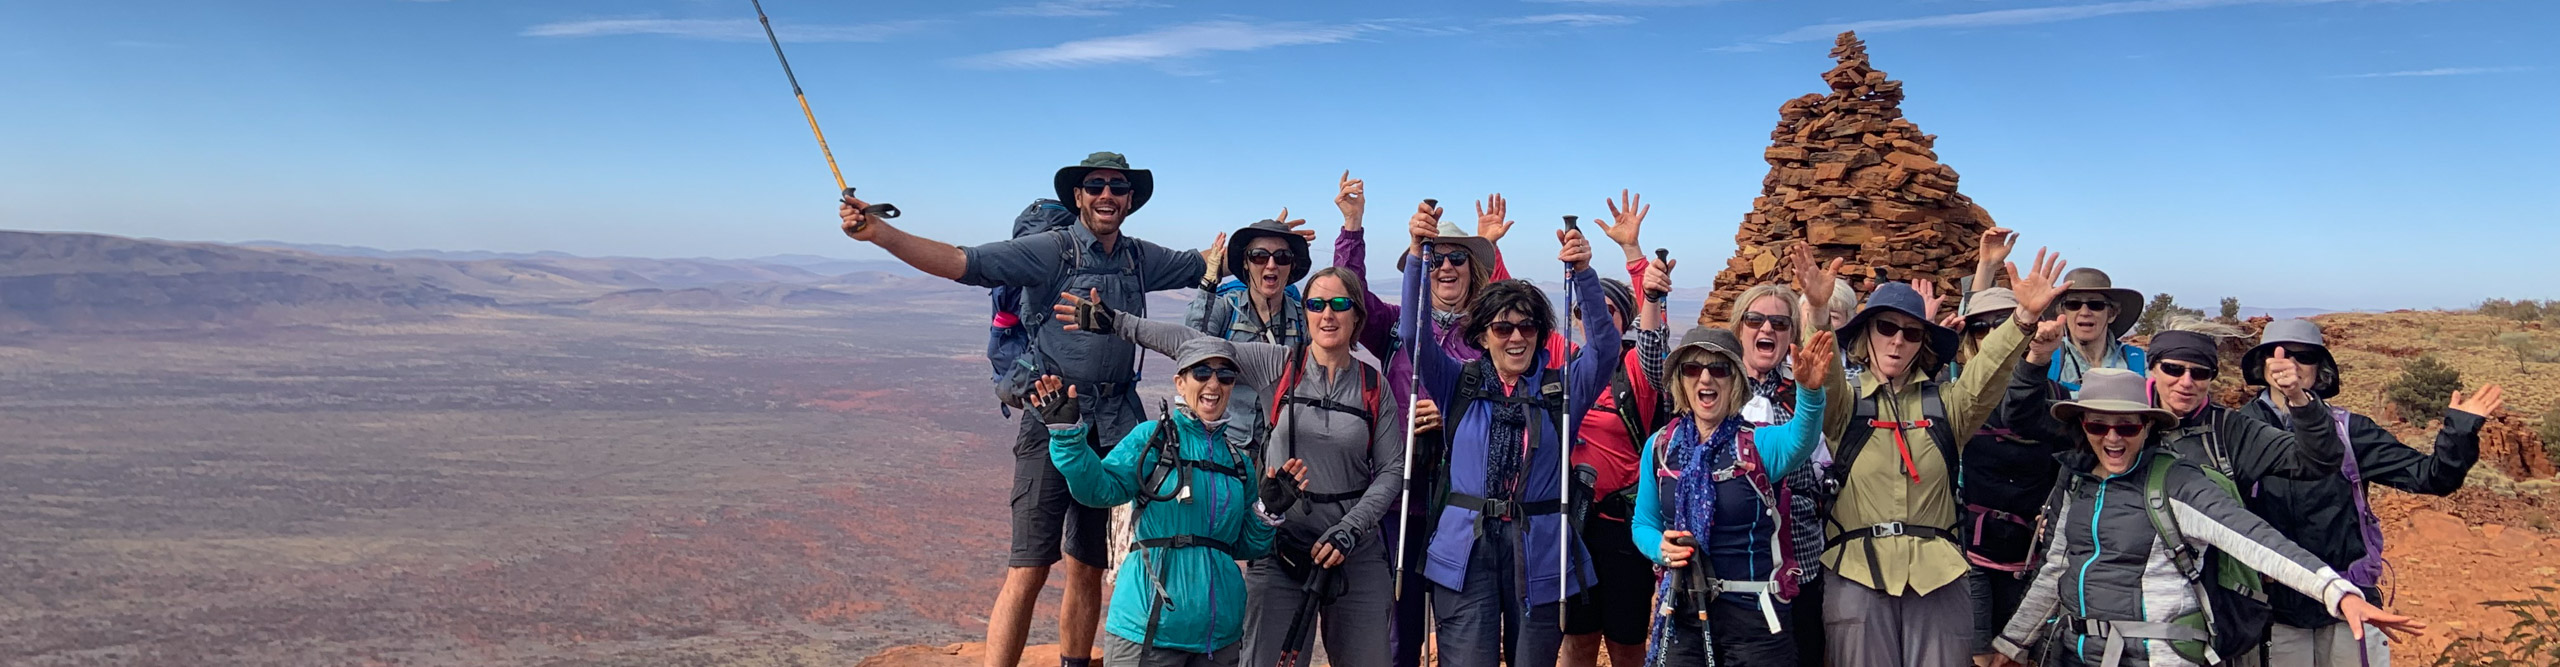 Group of hikers in Western Australia smiling at the camera